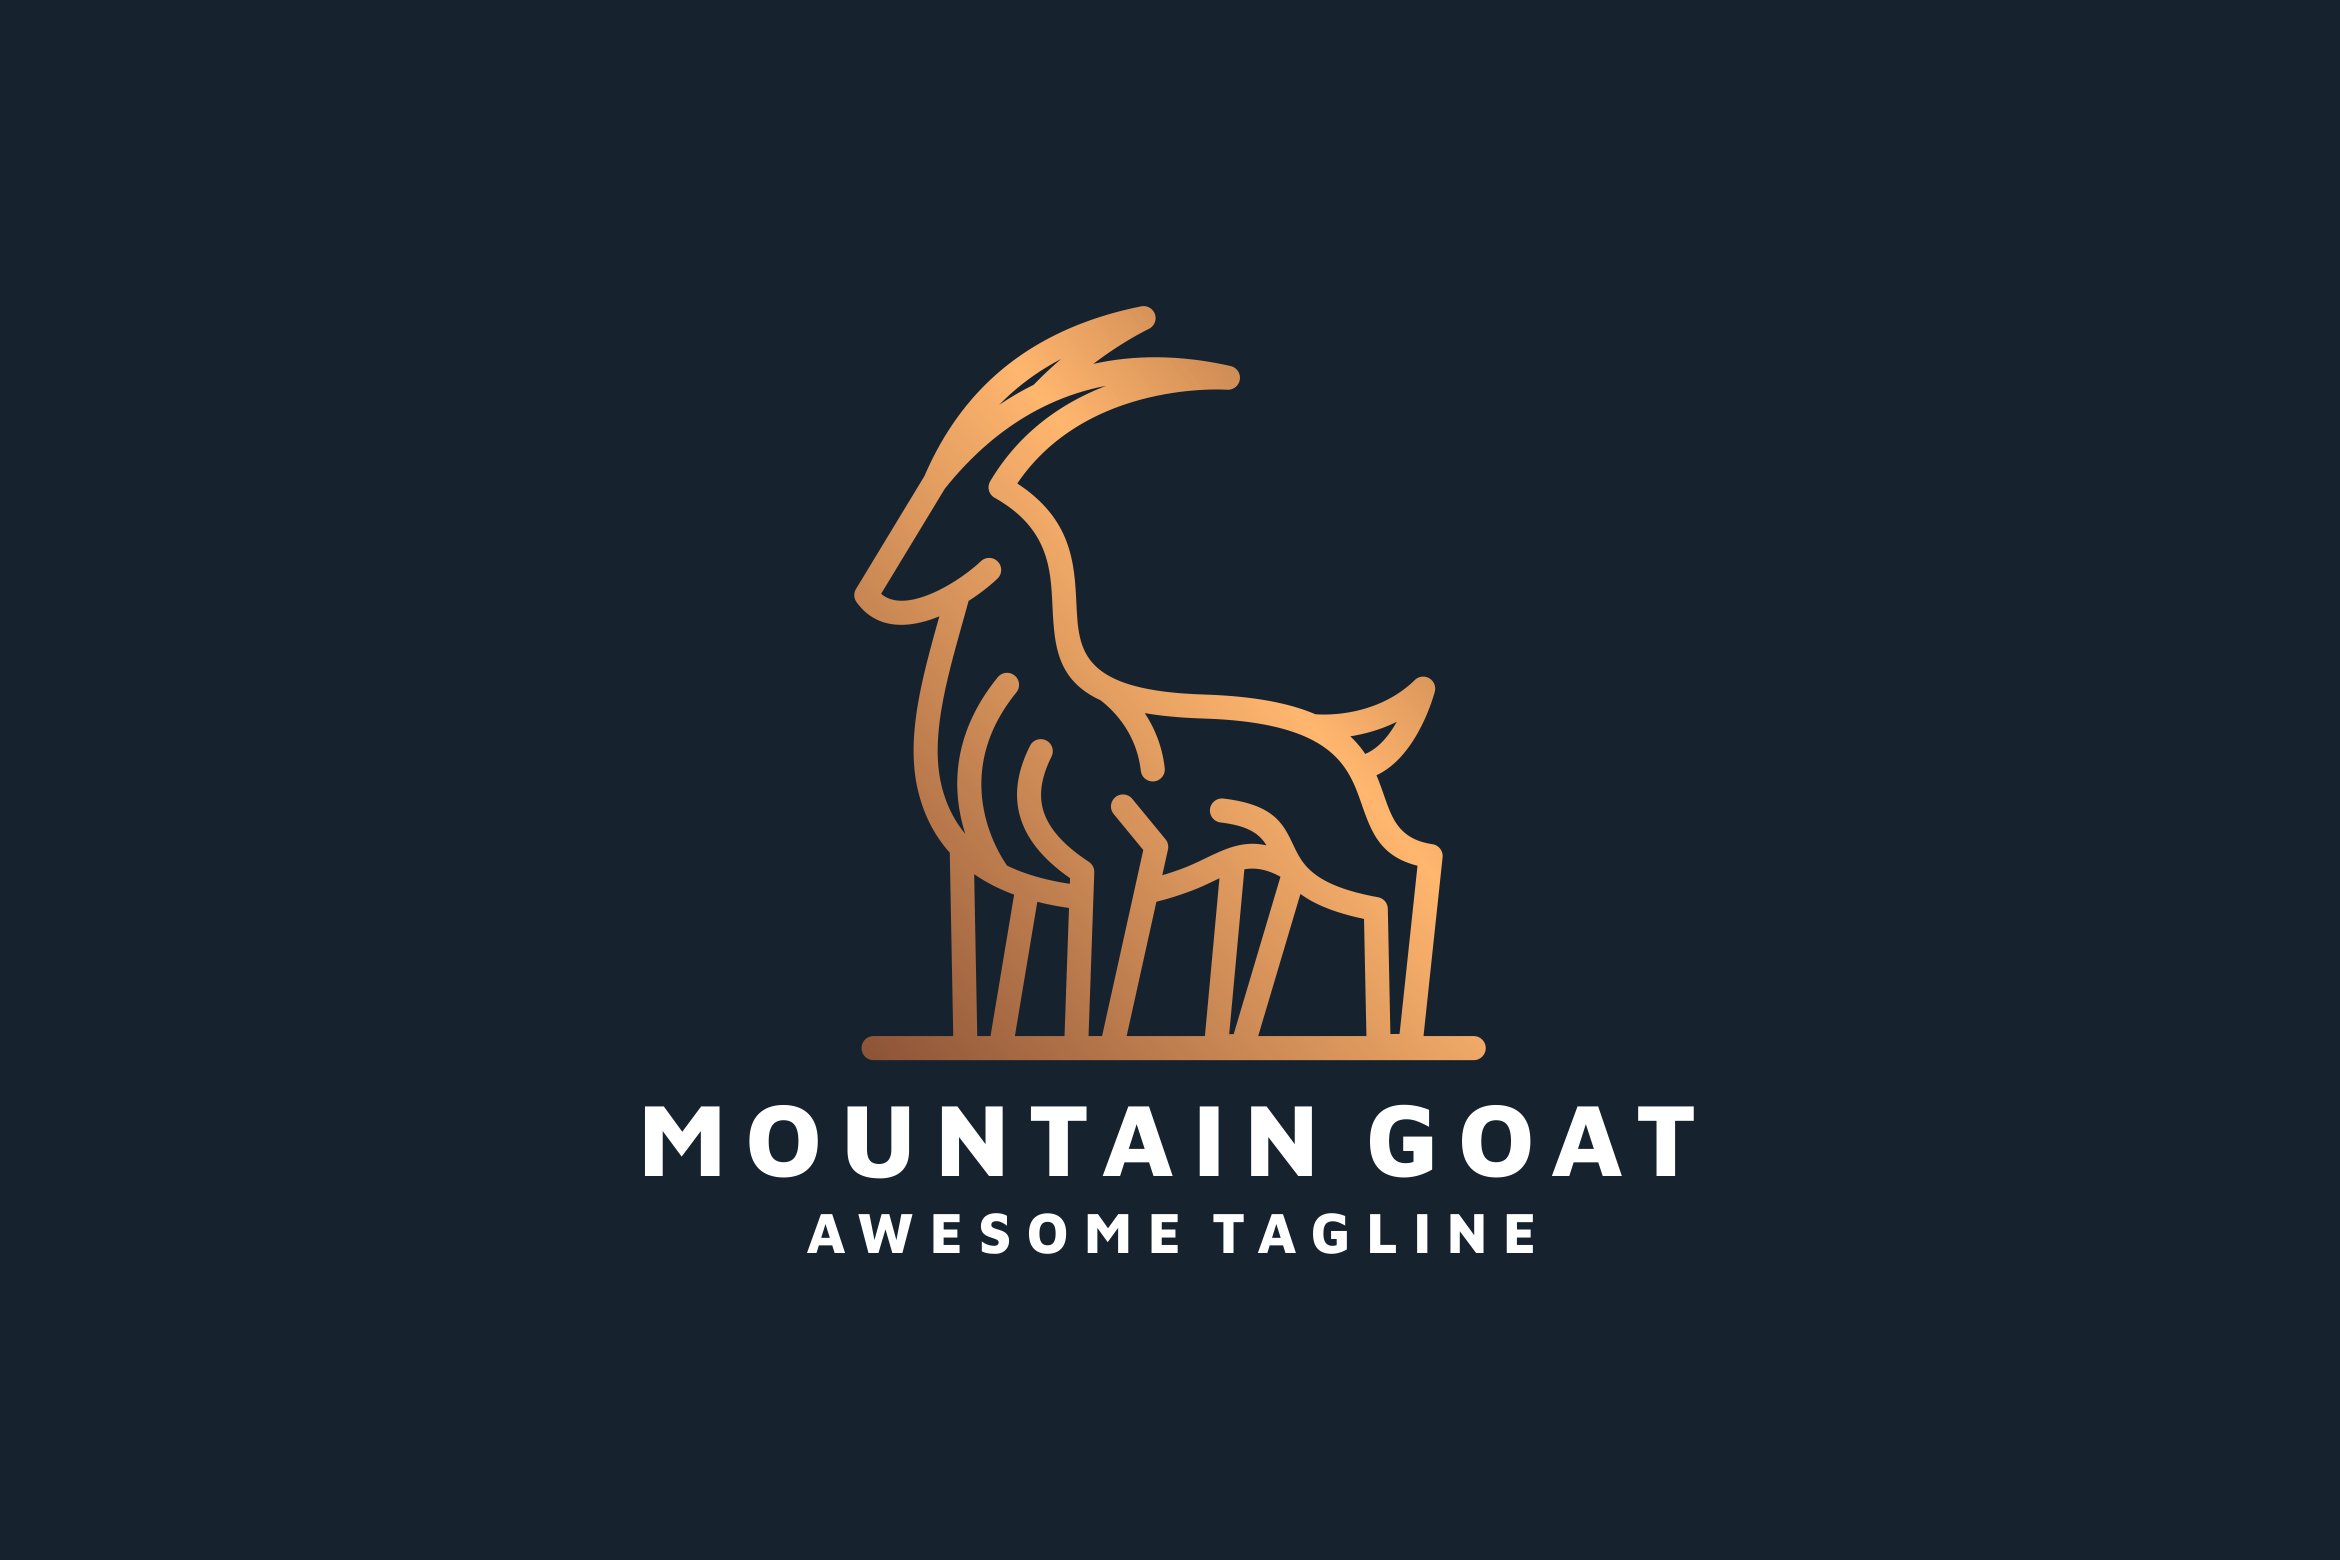 MOUNTAIN GOAT LINE ART LOGO TEMPLATE cover image.